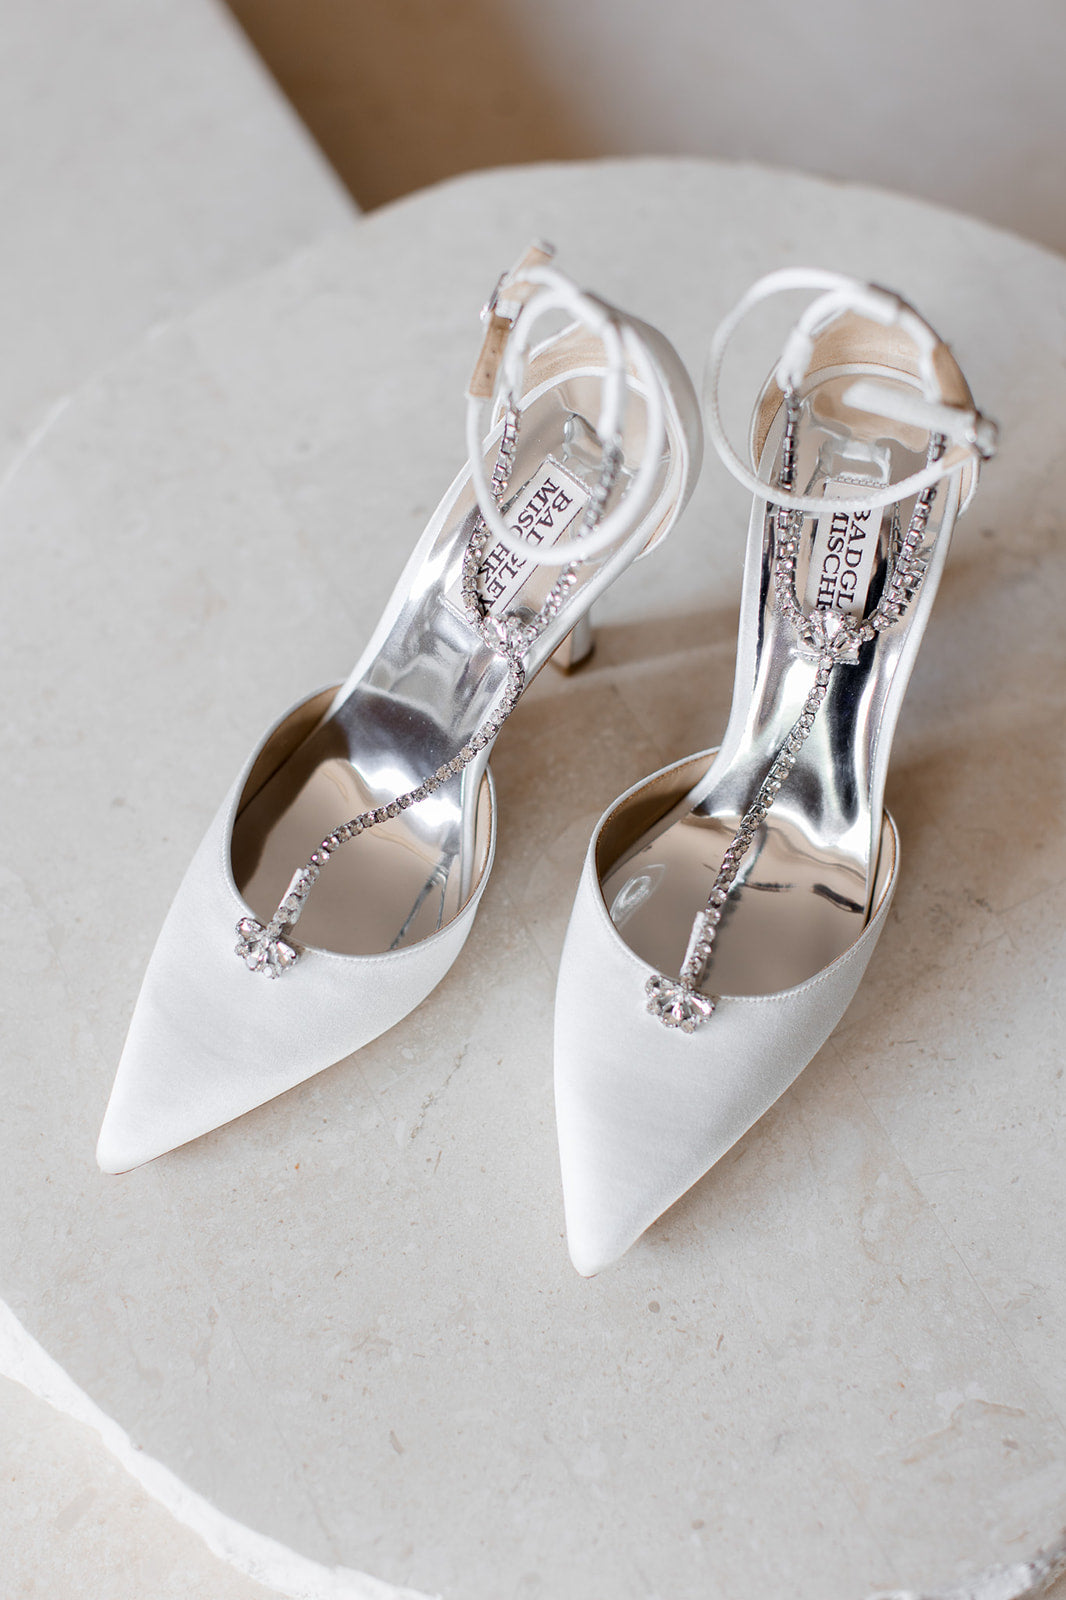 Fashion Champagne Bridal Shoes 3 Inch Heel Pumps With Pearl Ankle Strap